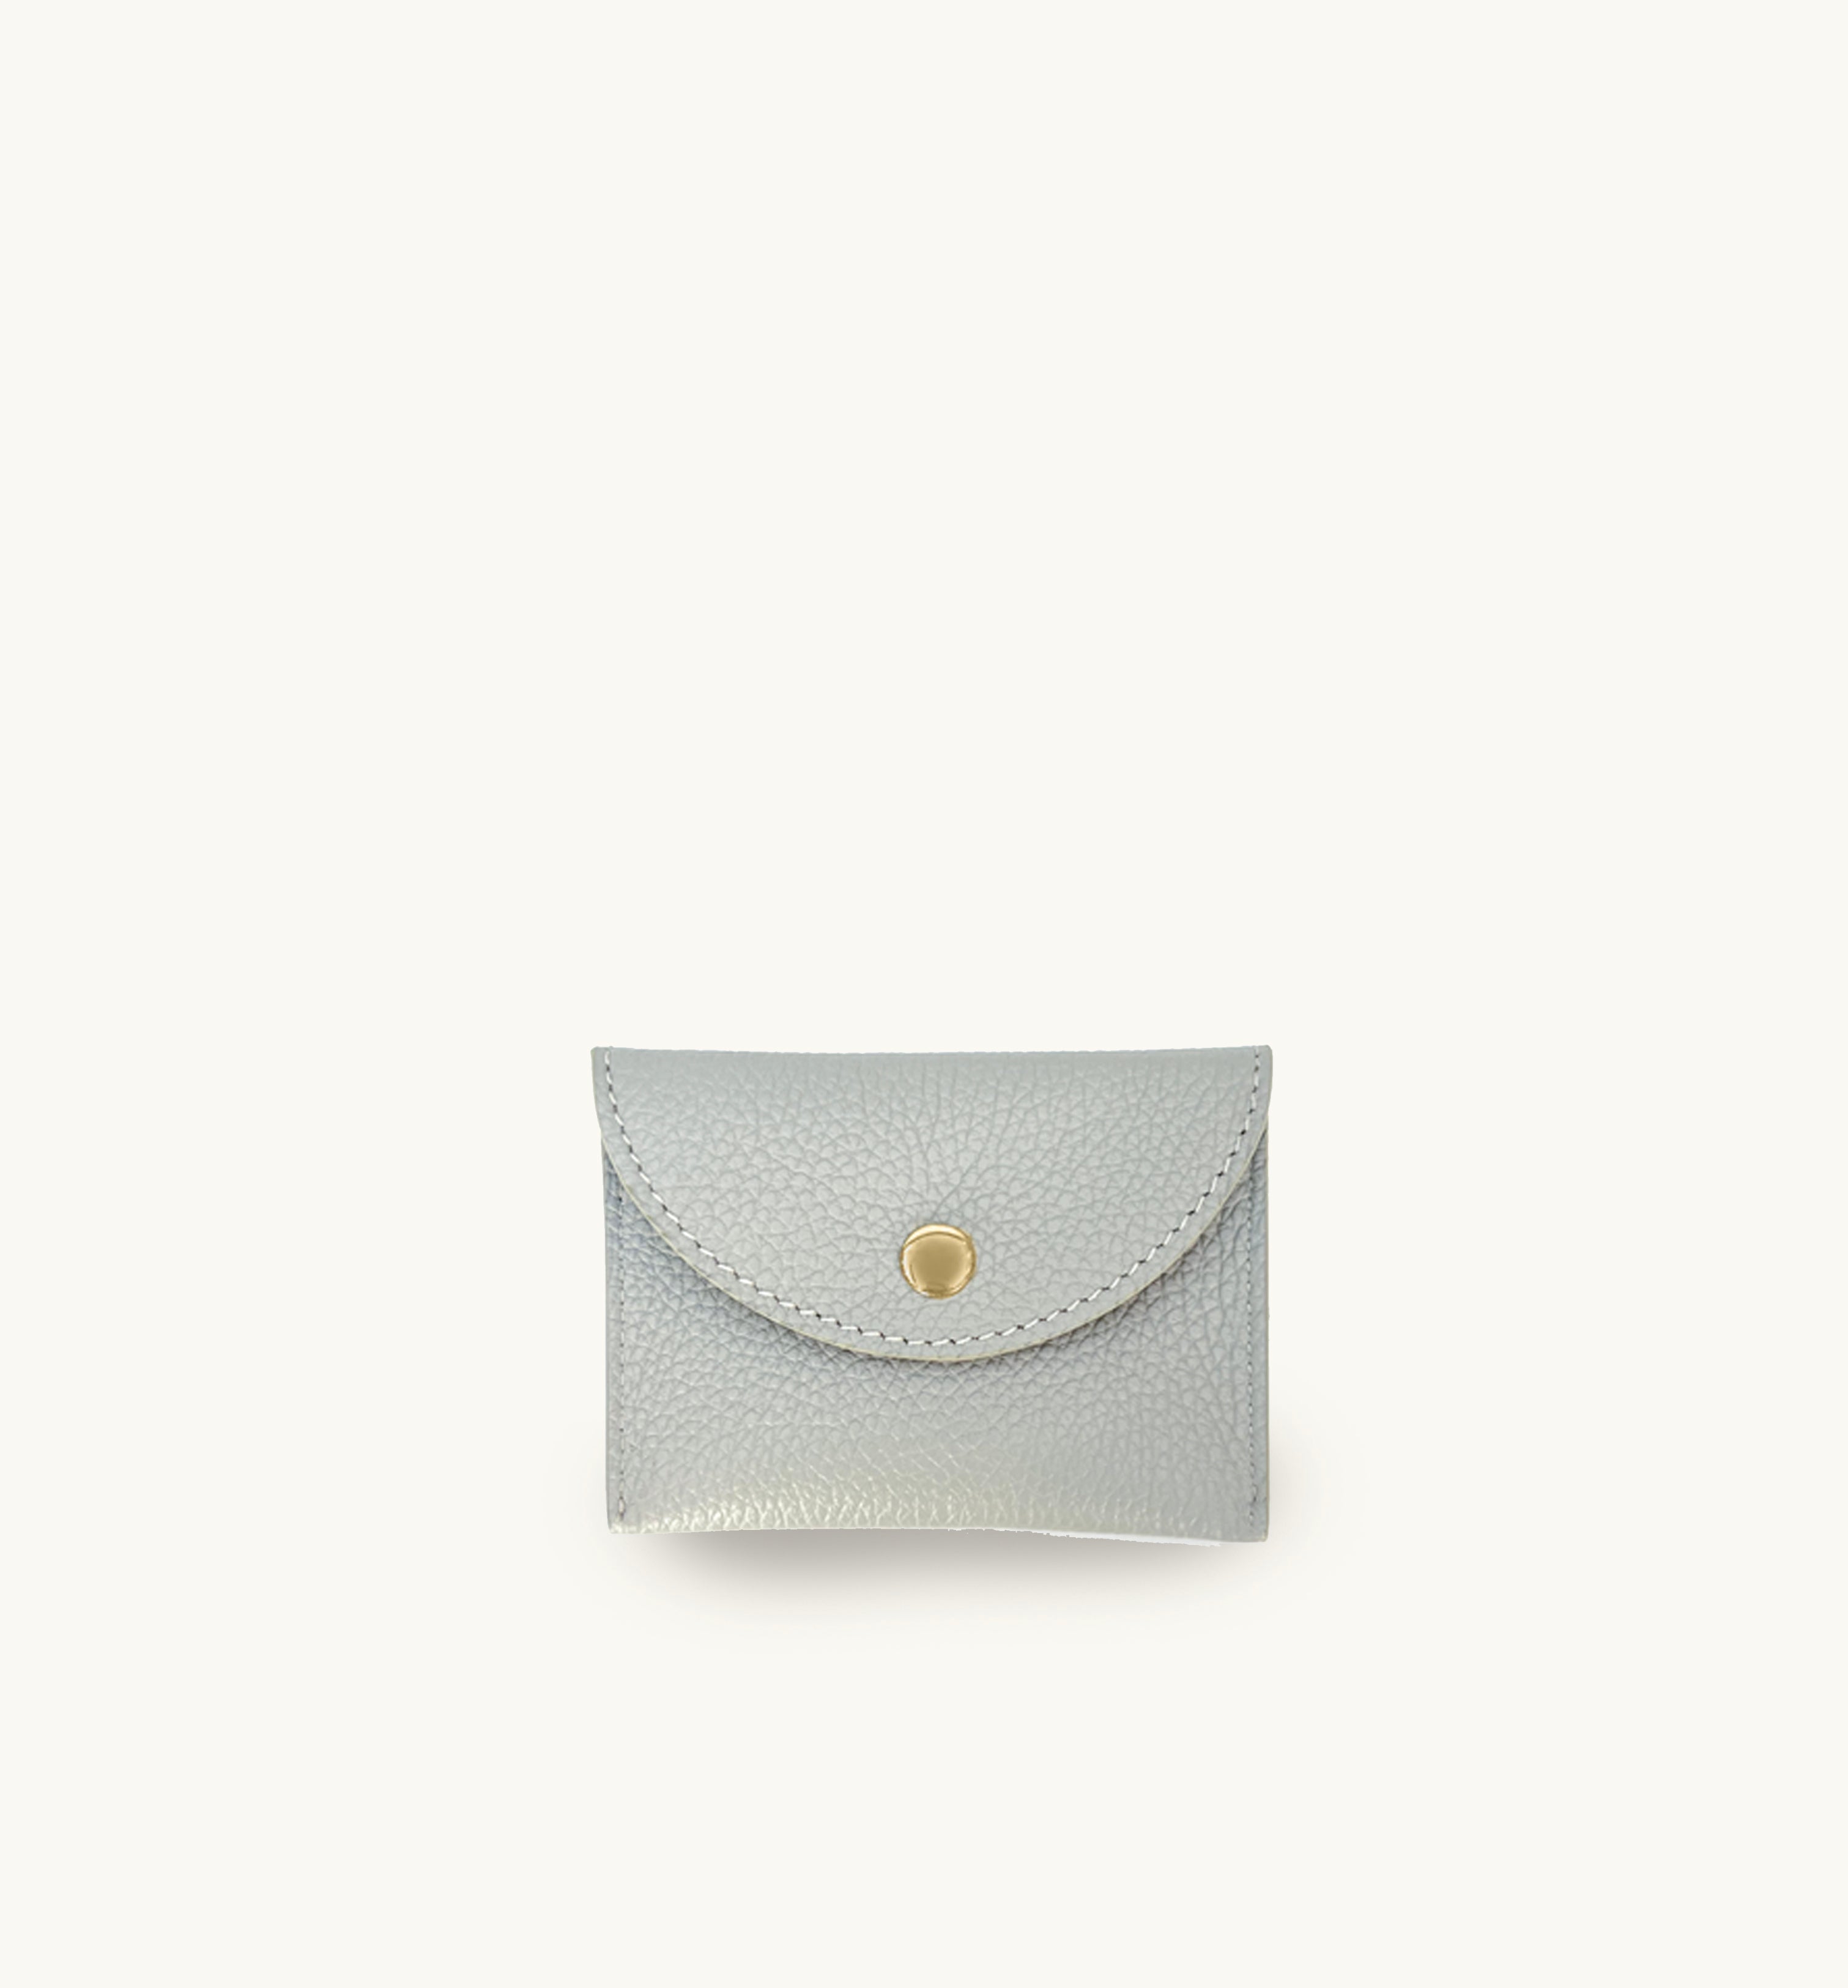 Apatchy Light Grey Leather Purse